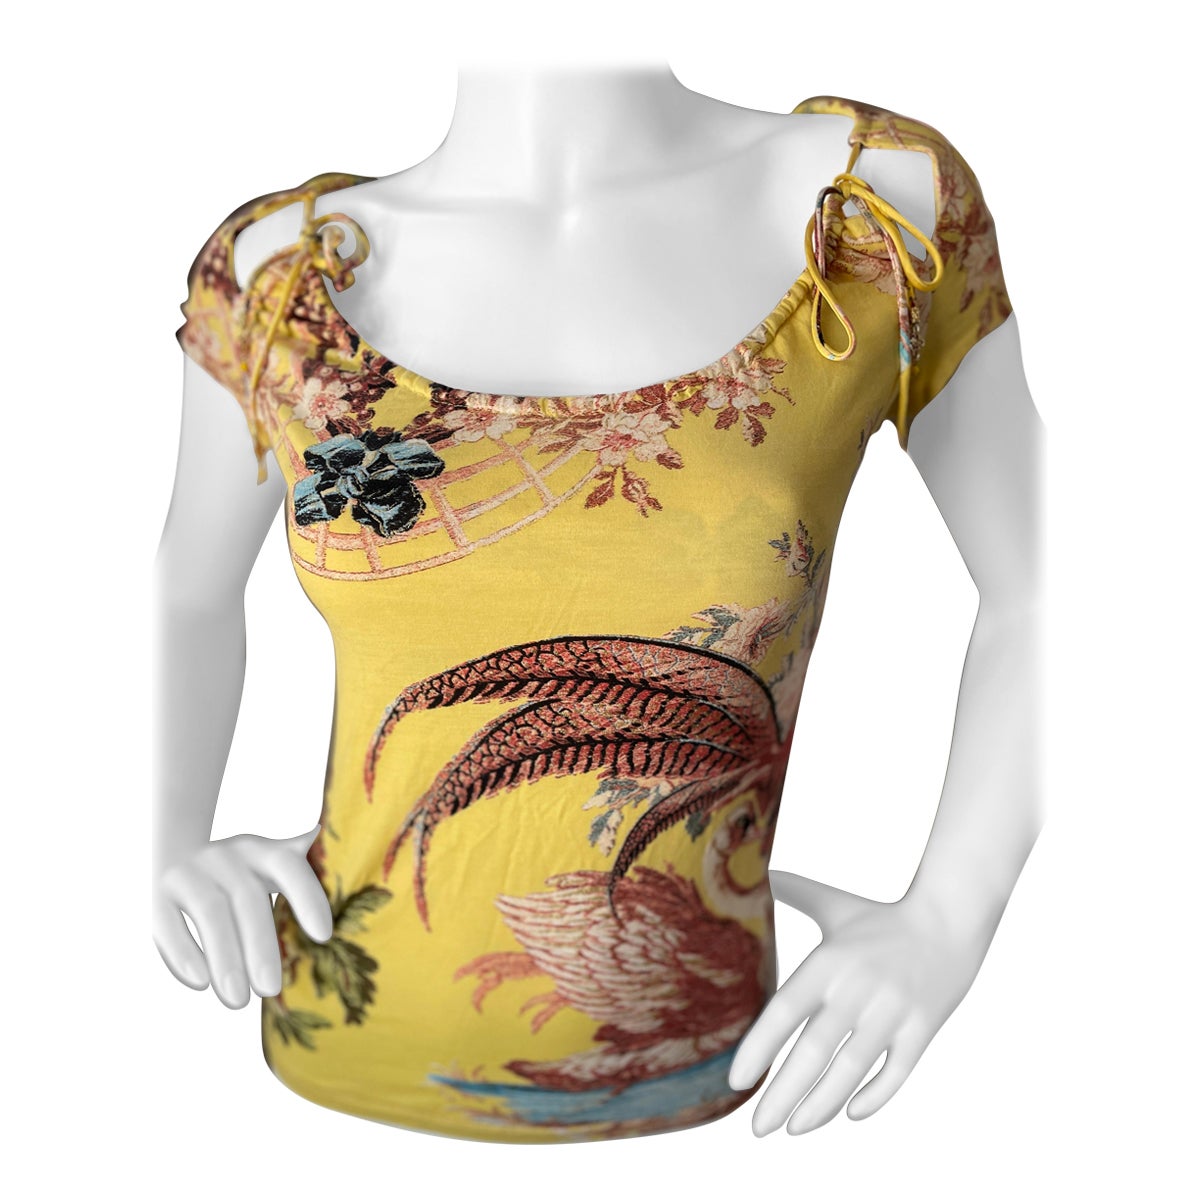 Roberto Cavalli Spring 2003 Pheasant Feather Floral Top  For Sale